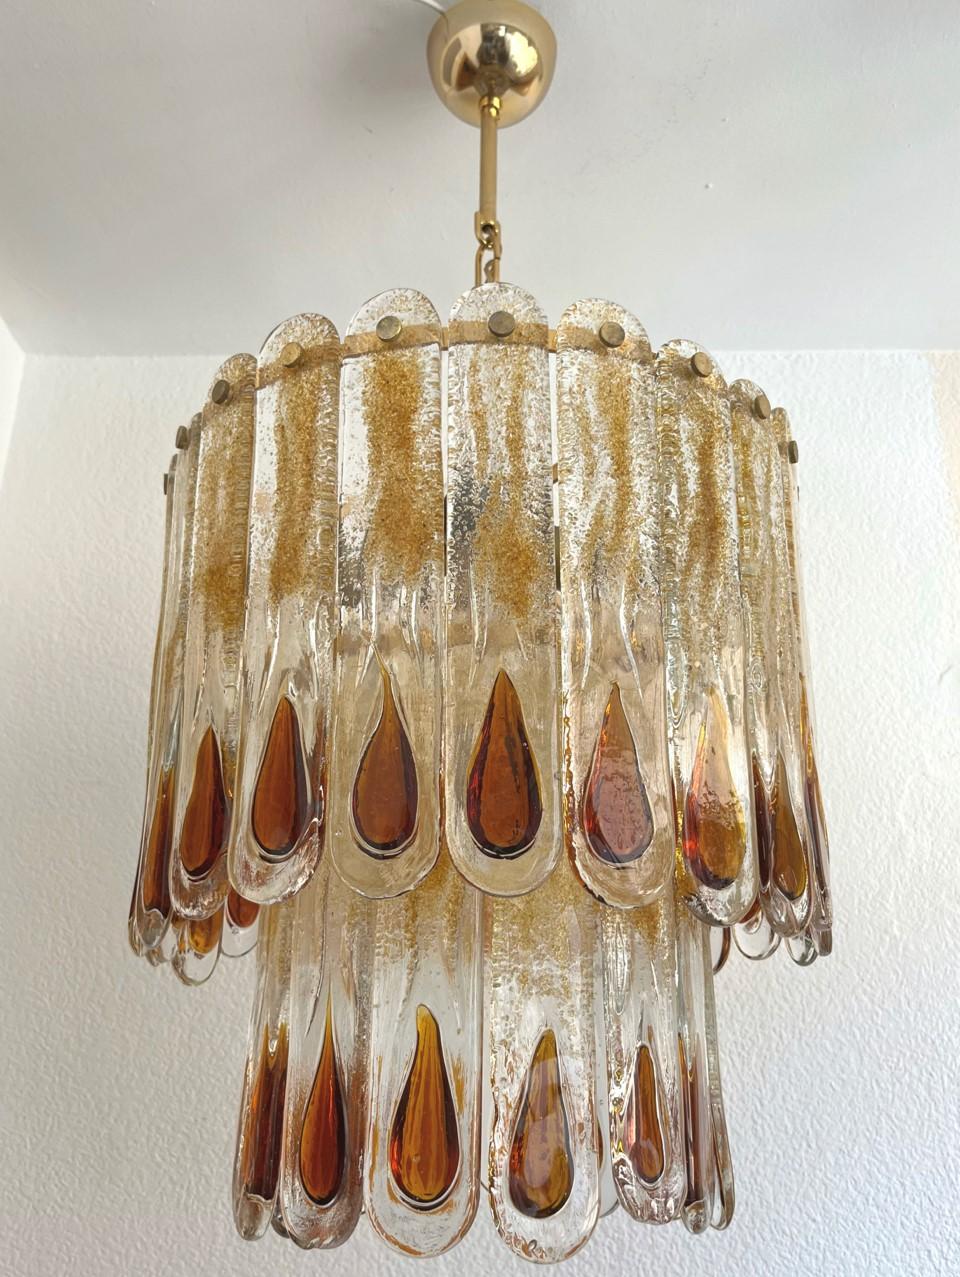 Marvelous and unique Italian amber Murano glass Chandelier from 1970s.
This fixture was made during the 1970s in Italy for the Venice Company “Mazzega”.
Mazzega lie in the noble Venetian glassworking tradition; the firm was founded Angelo Vittorio